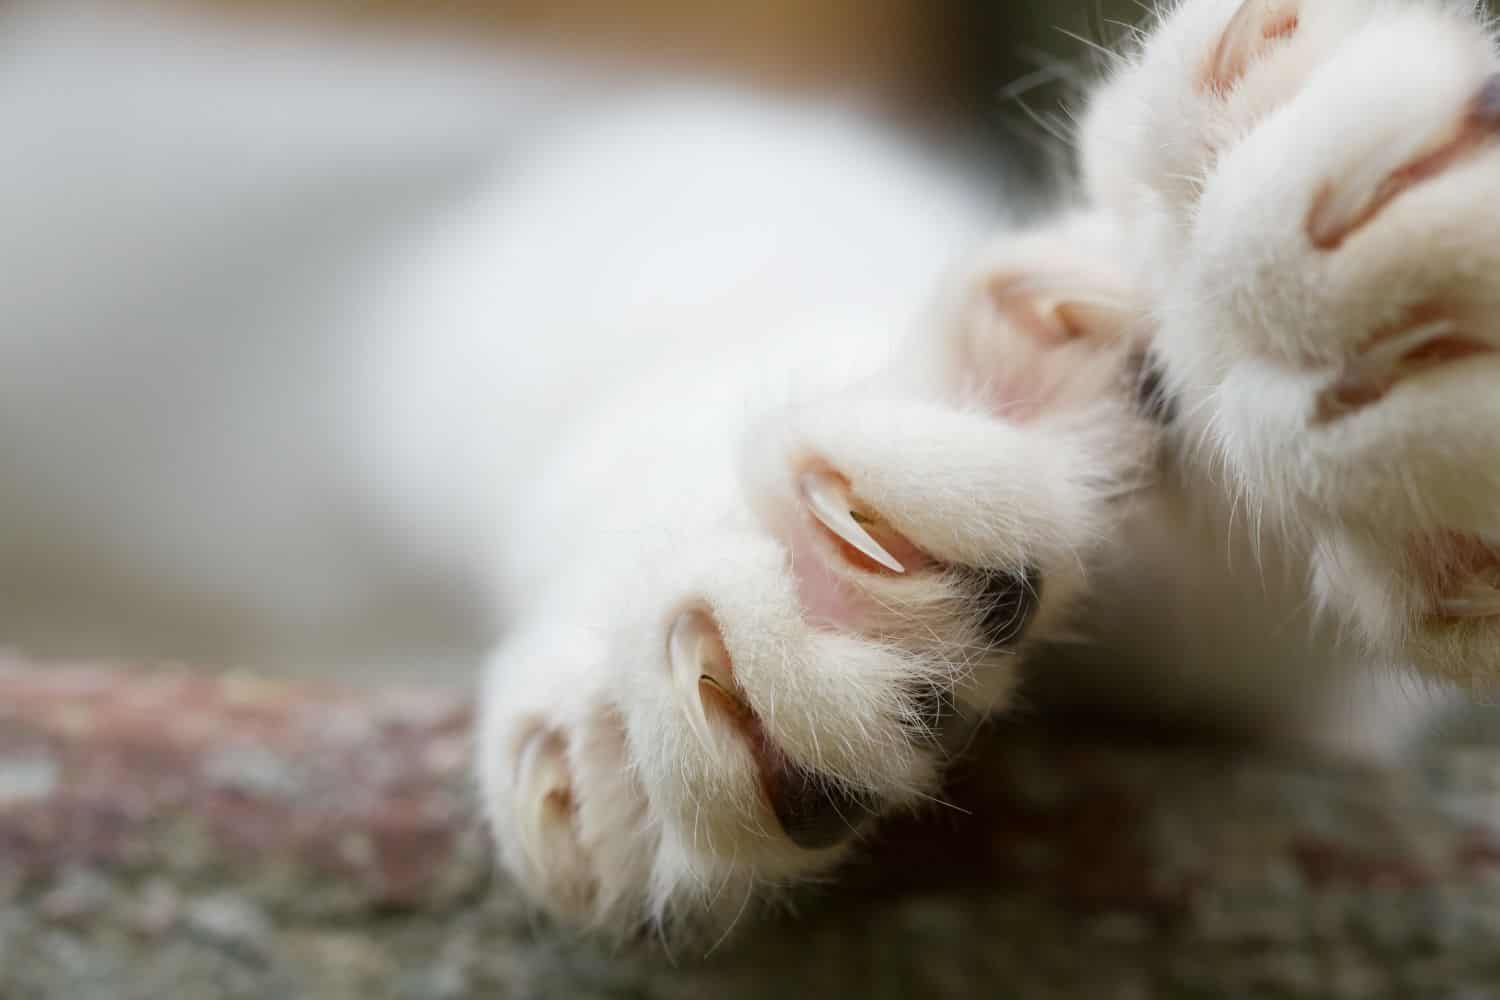 A photo of cat claws.